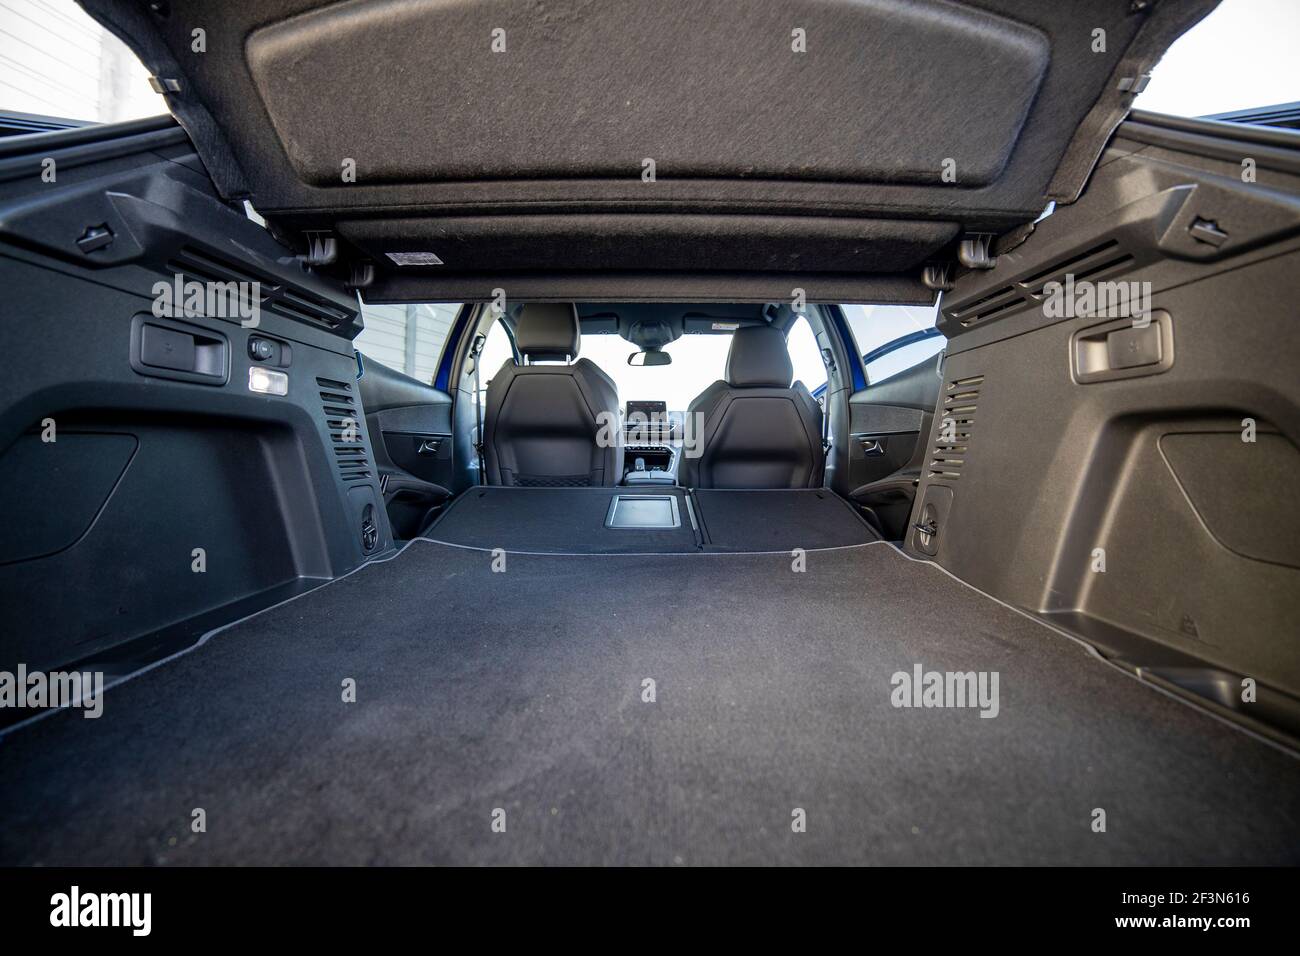 empty trunk of a modern car with folded rear seats. large interior volume. trunk view. Stock Photo